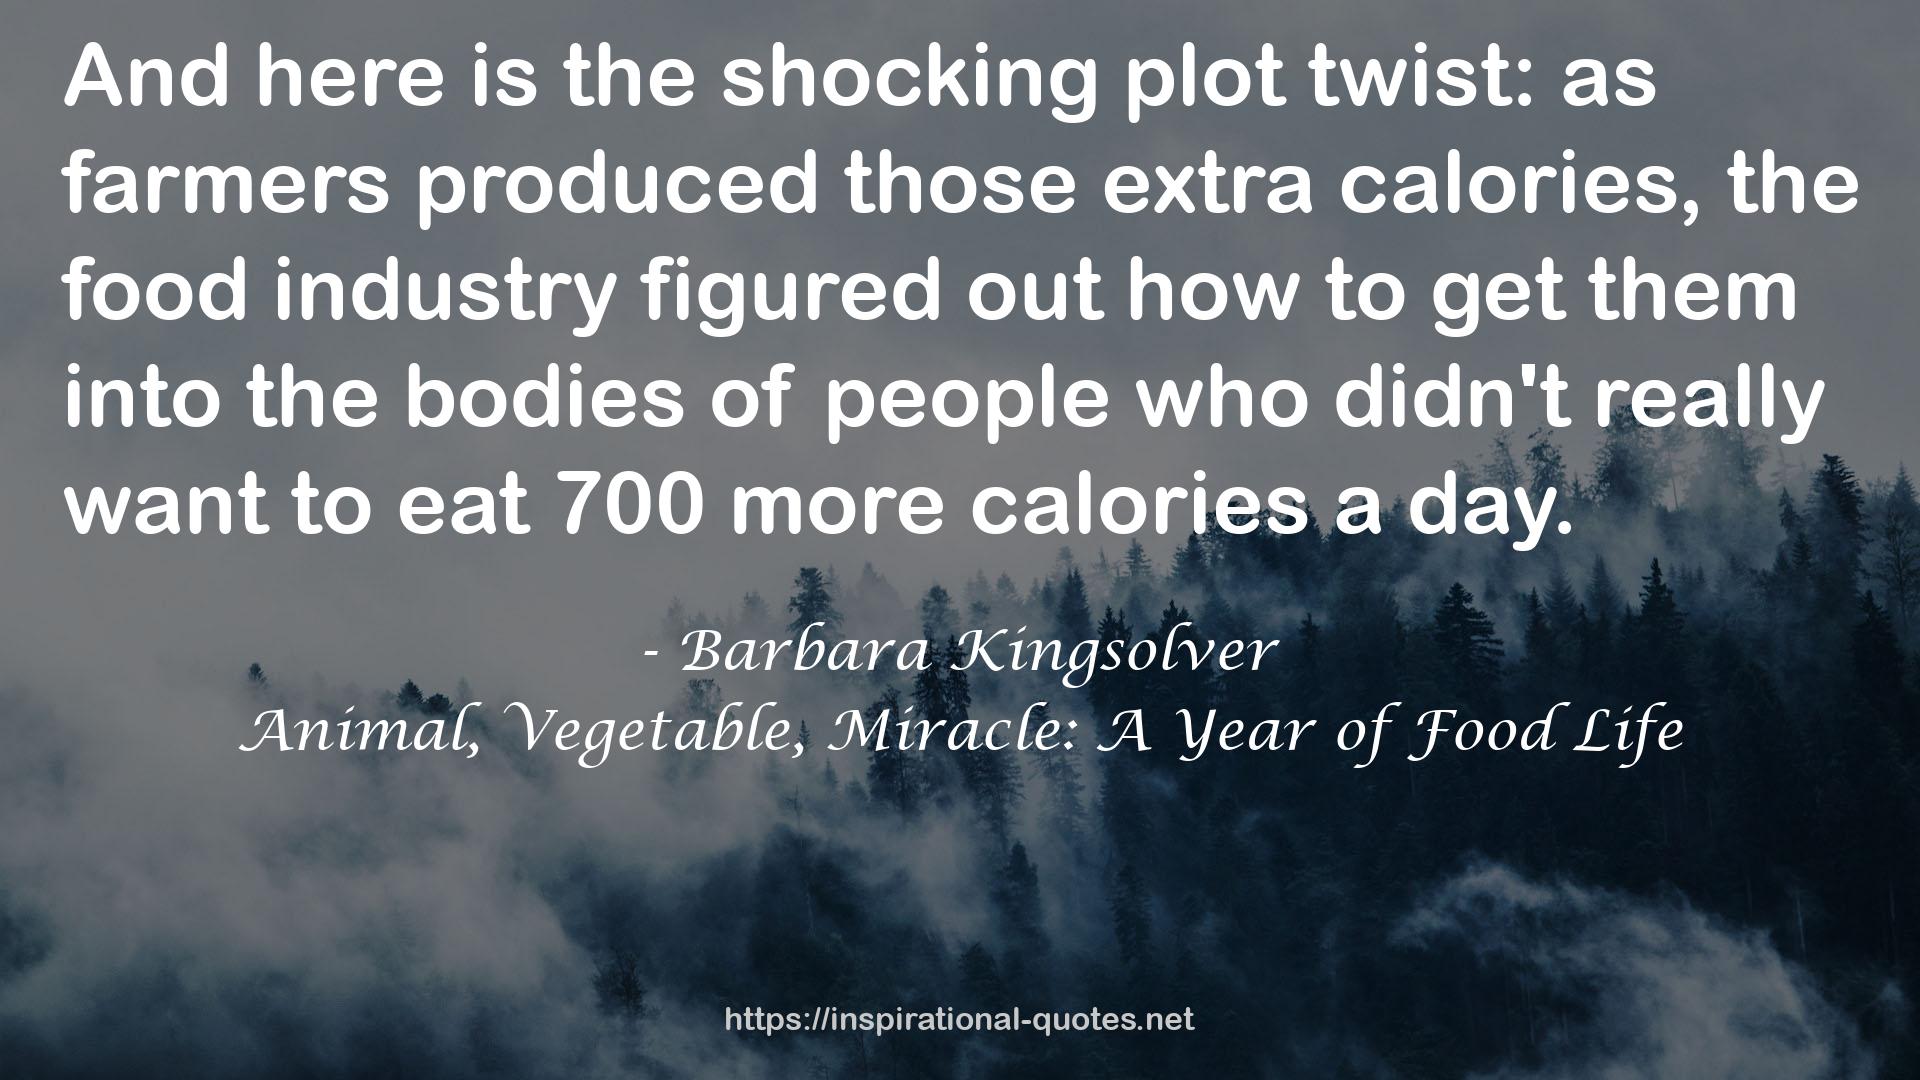 Animal, Vegetable, Miracle: A Year of Food Life QUOTES